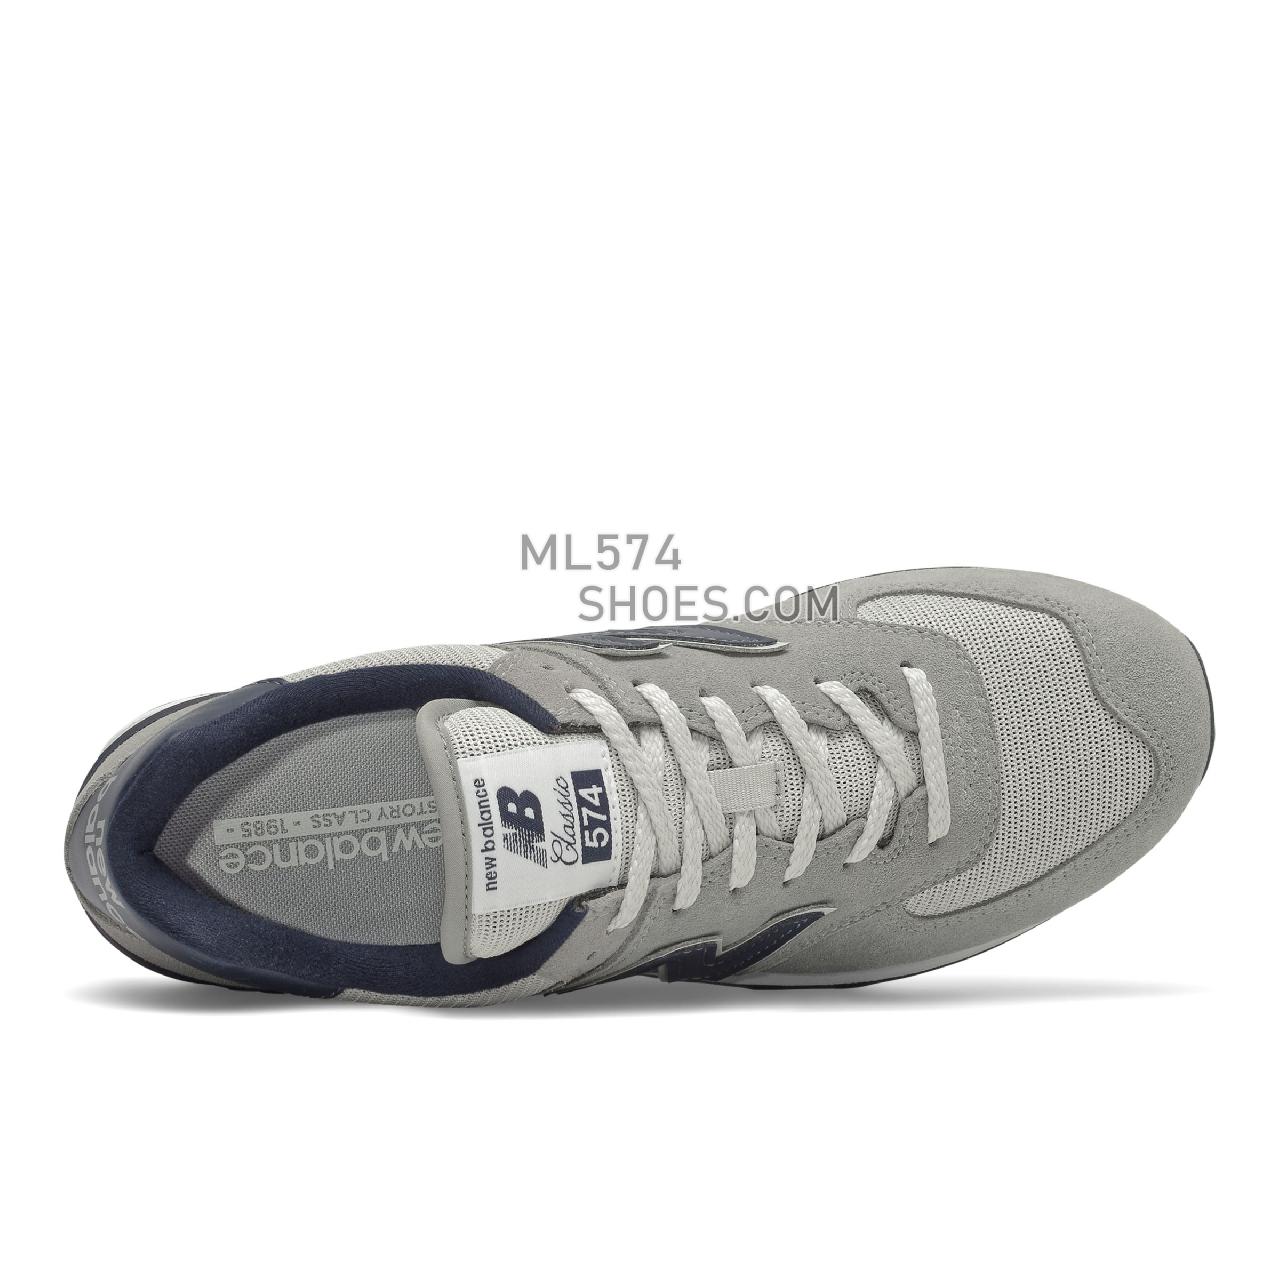 New Balance 574v2 - Men's Sport Style Sneakers - Grey with Navy - ML574BE2